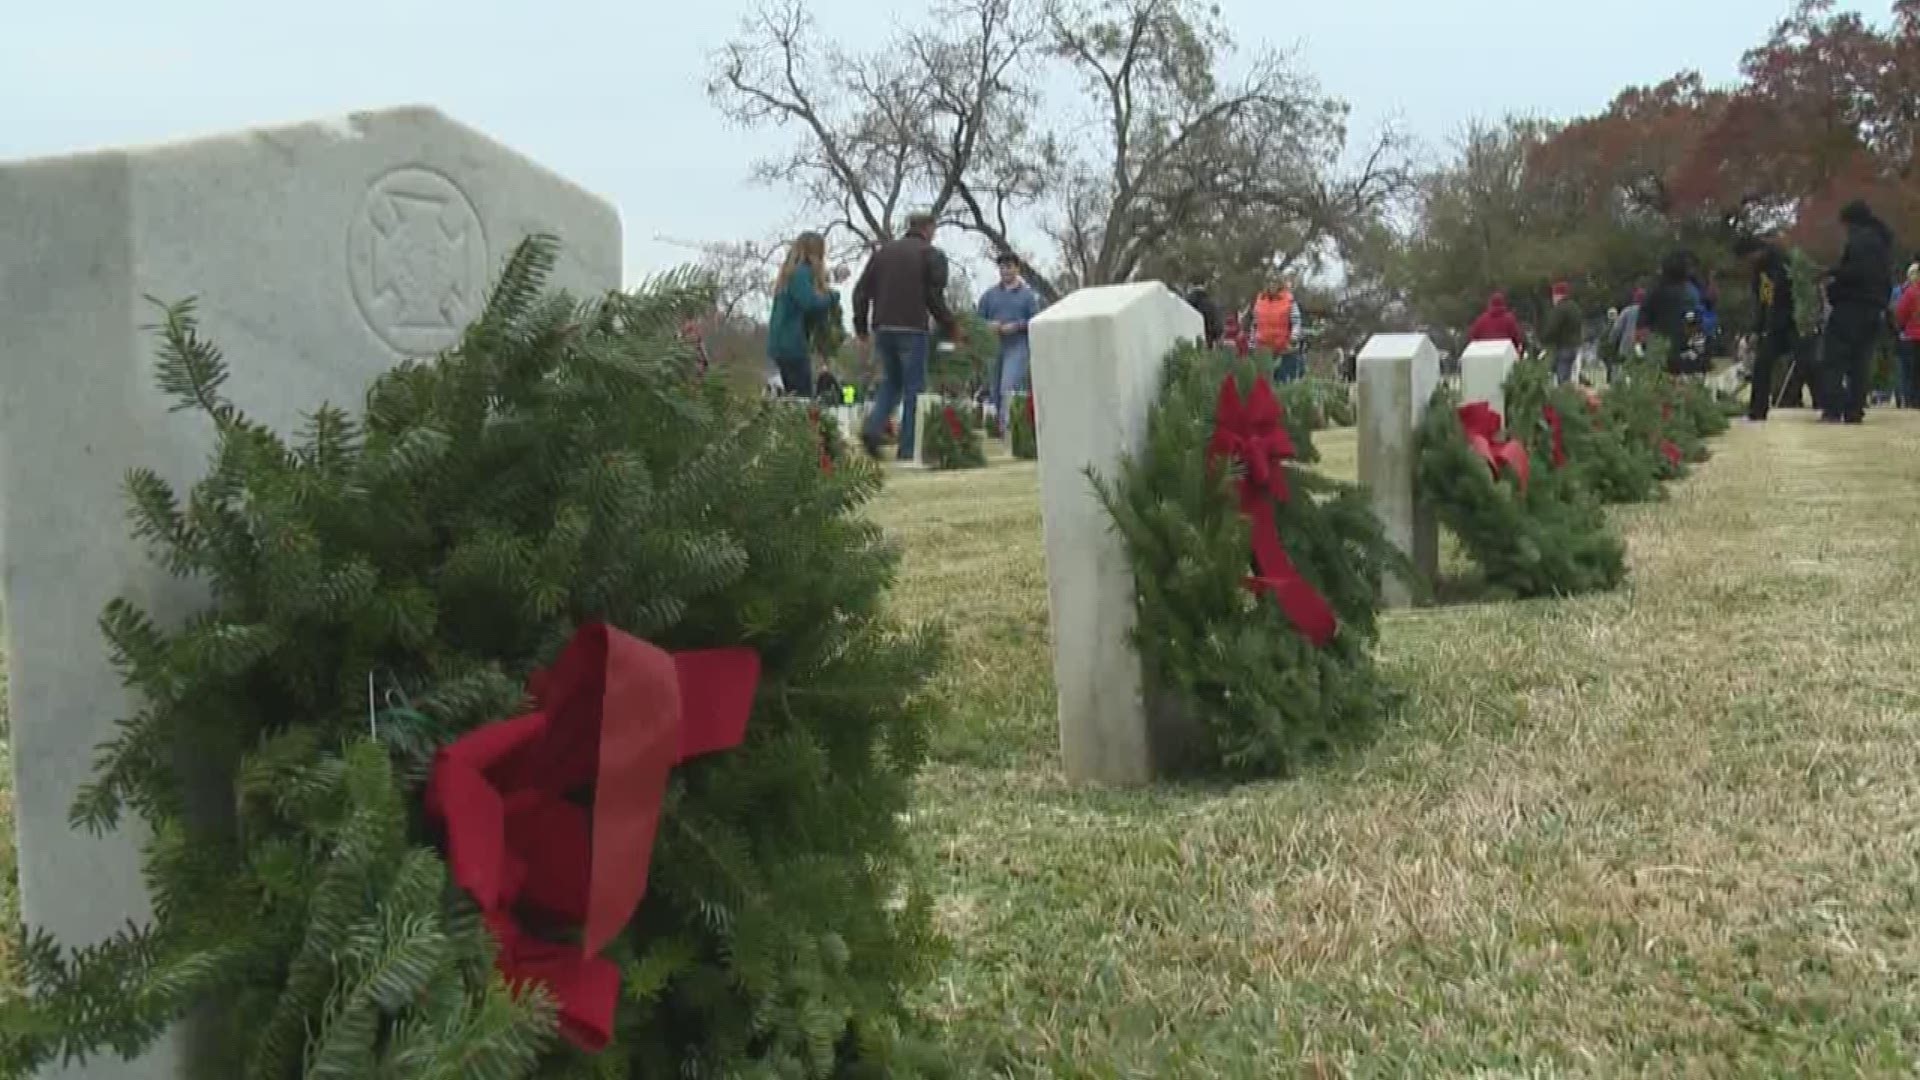 Across the country today volunteers laid holiday wreaths on the graves of veterans at 1,500 locations. This was the second year the Texas State Ceremony participated in the Wreaths Across America tradition.